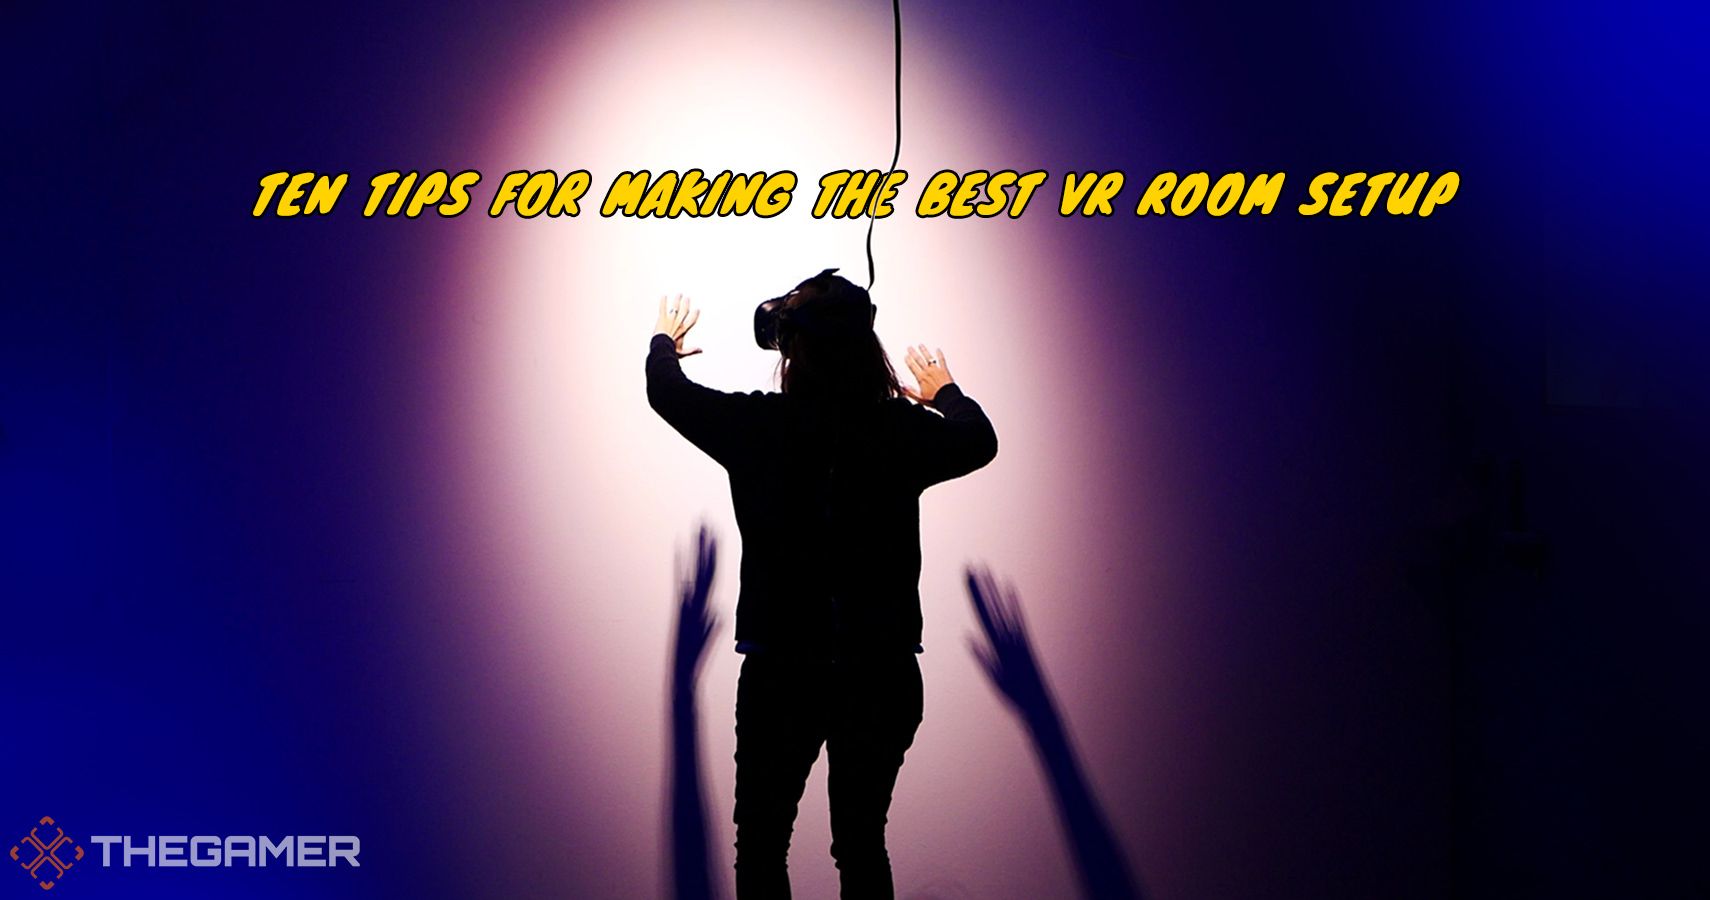 A Guide to Perfect VR Room Setup